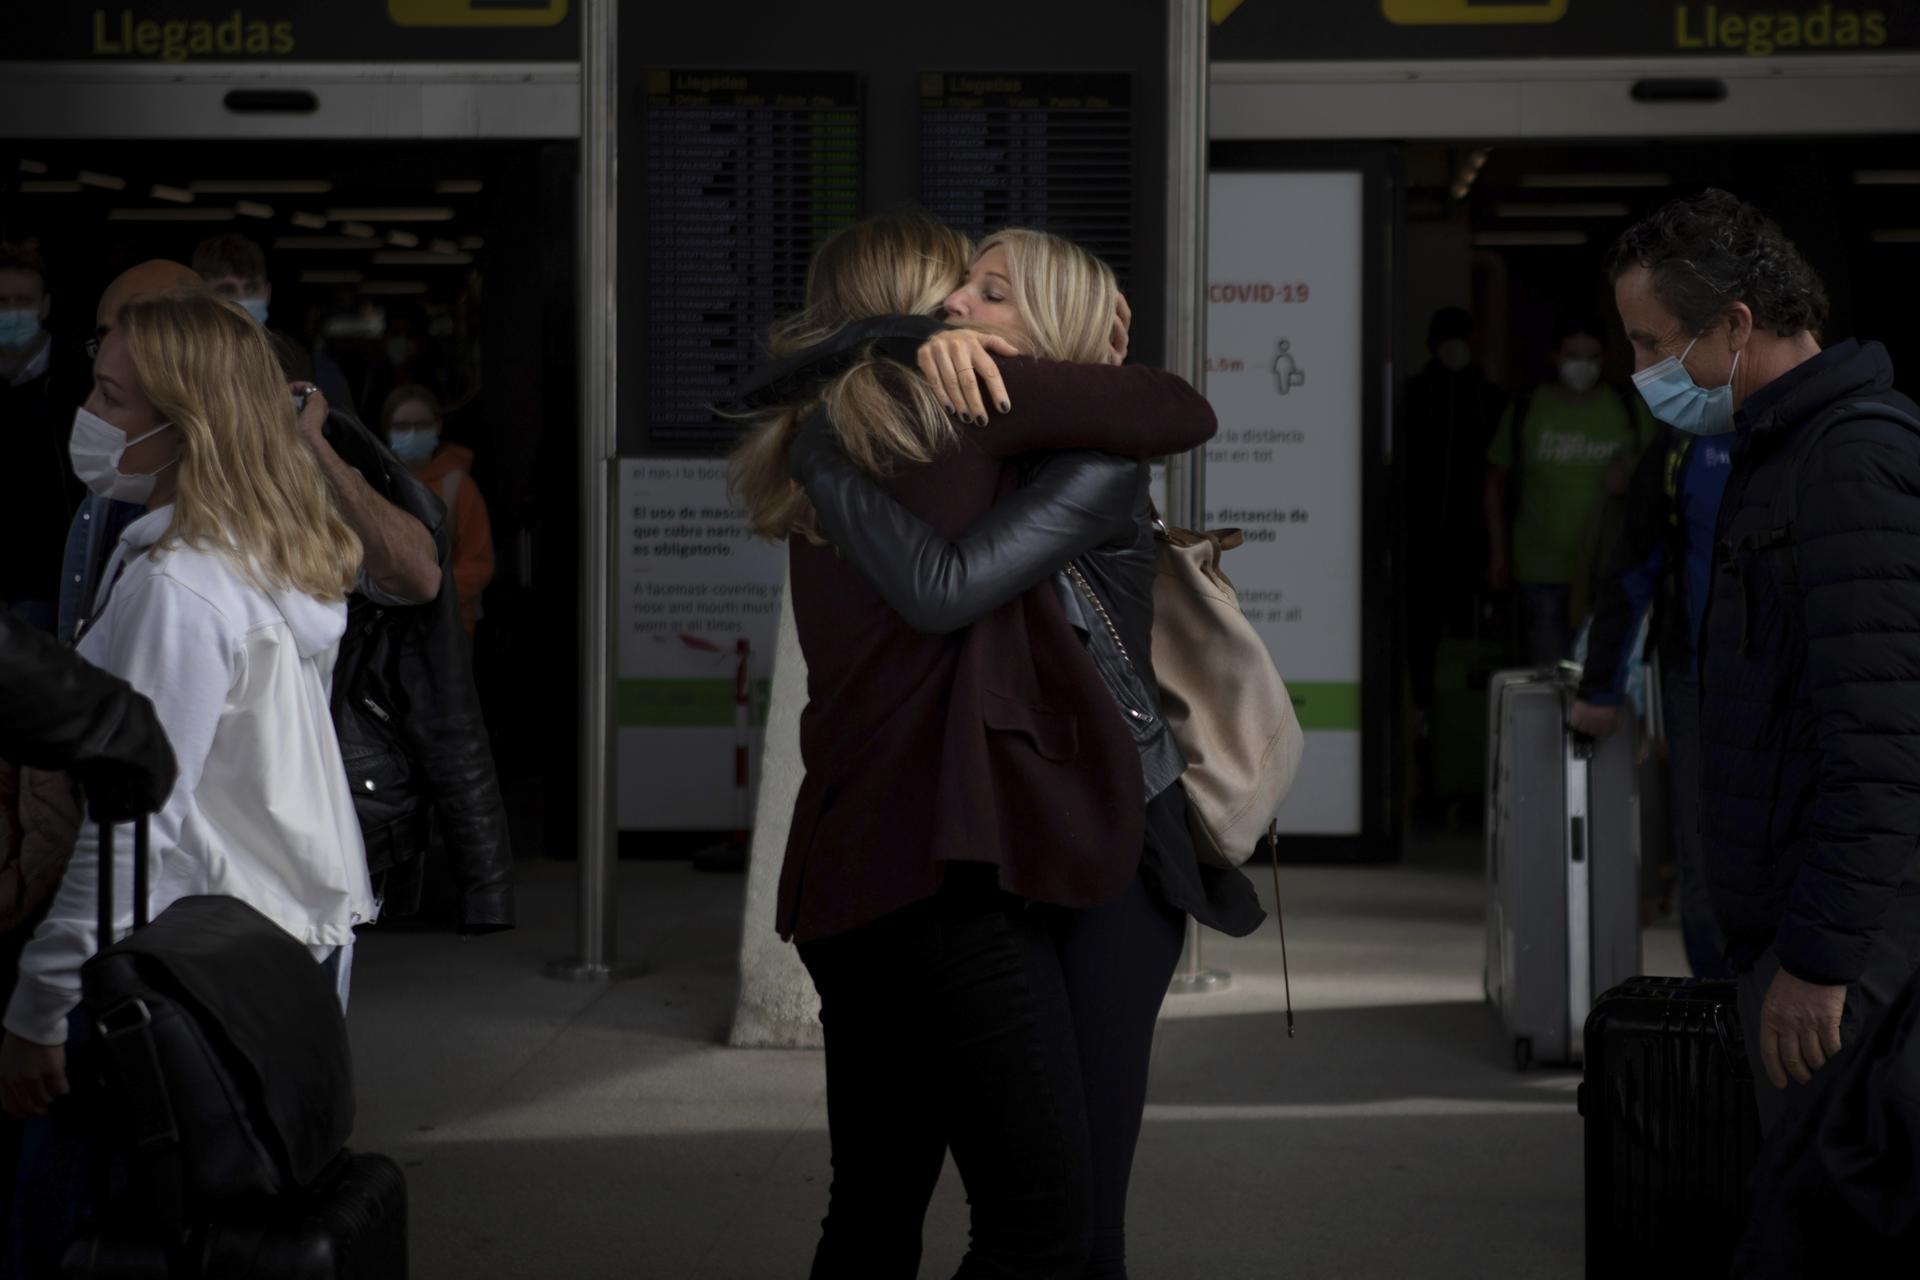 Two women in black clothing embrace in an airport